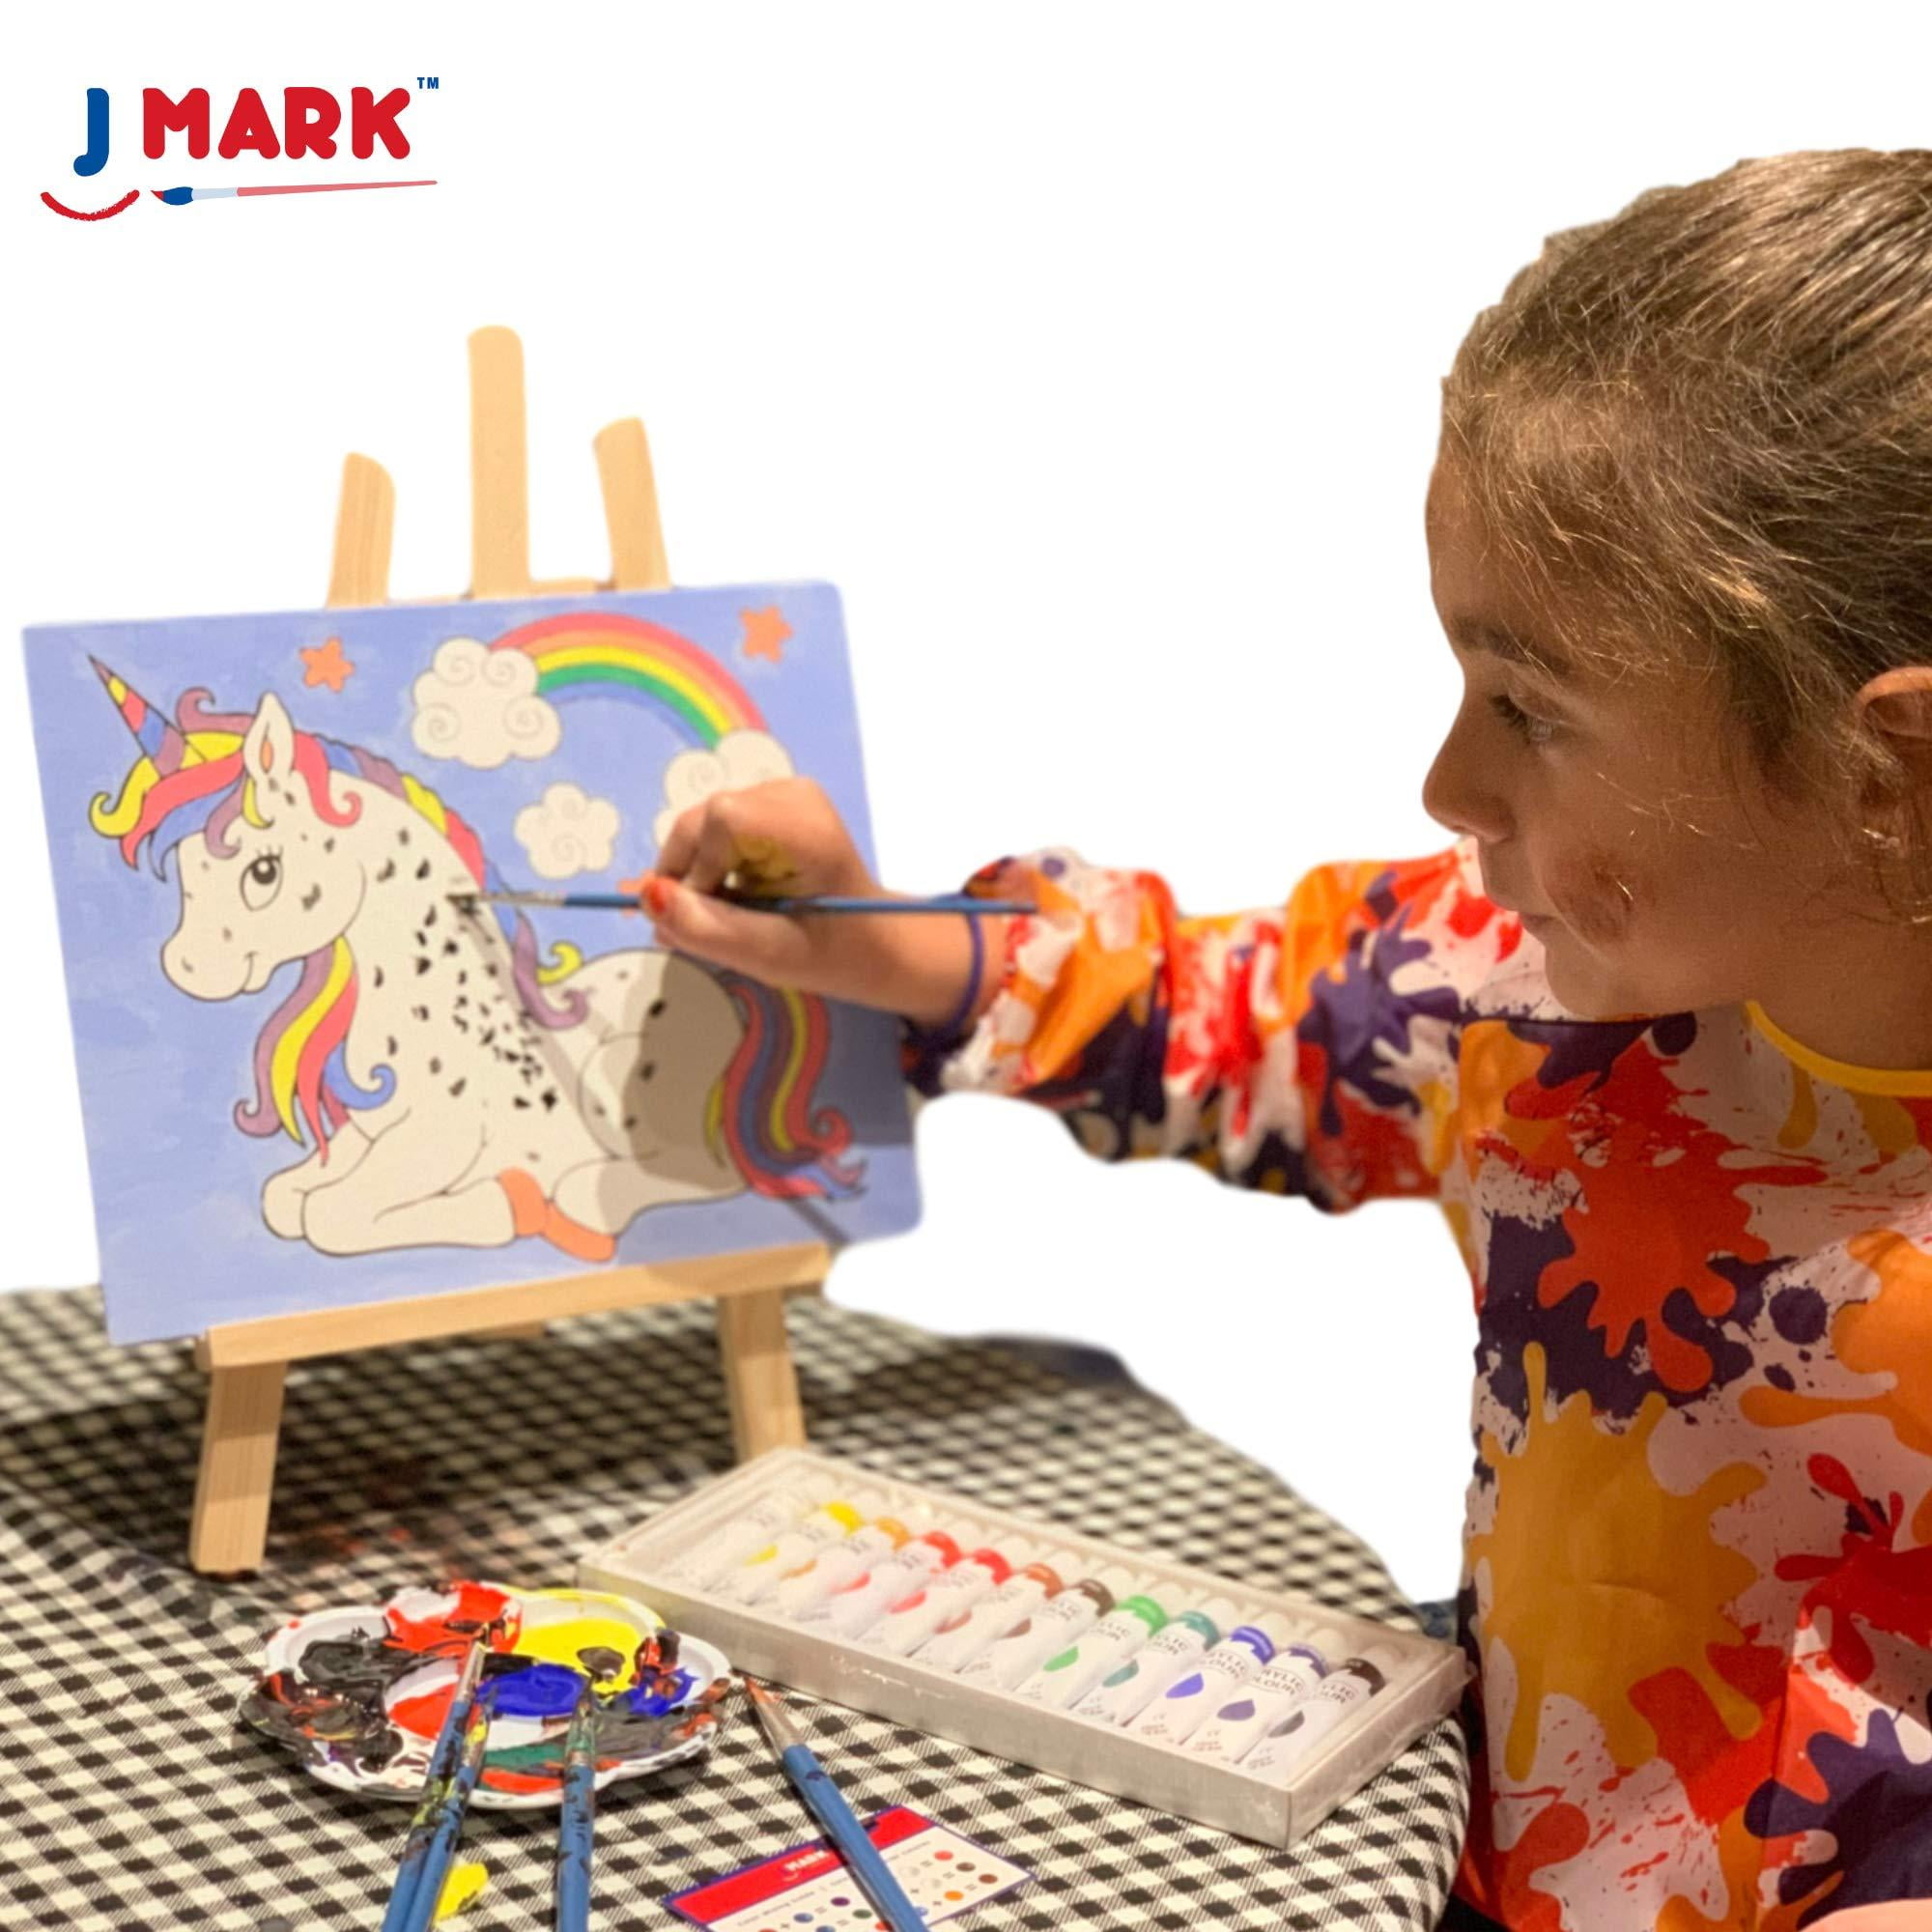 J MARK Painting Kit Includes Acrylic Paint Set, 8 X 10 in. Canvases,  Brushes, Palette And More